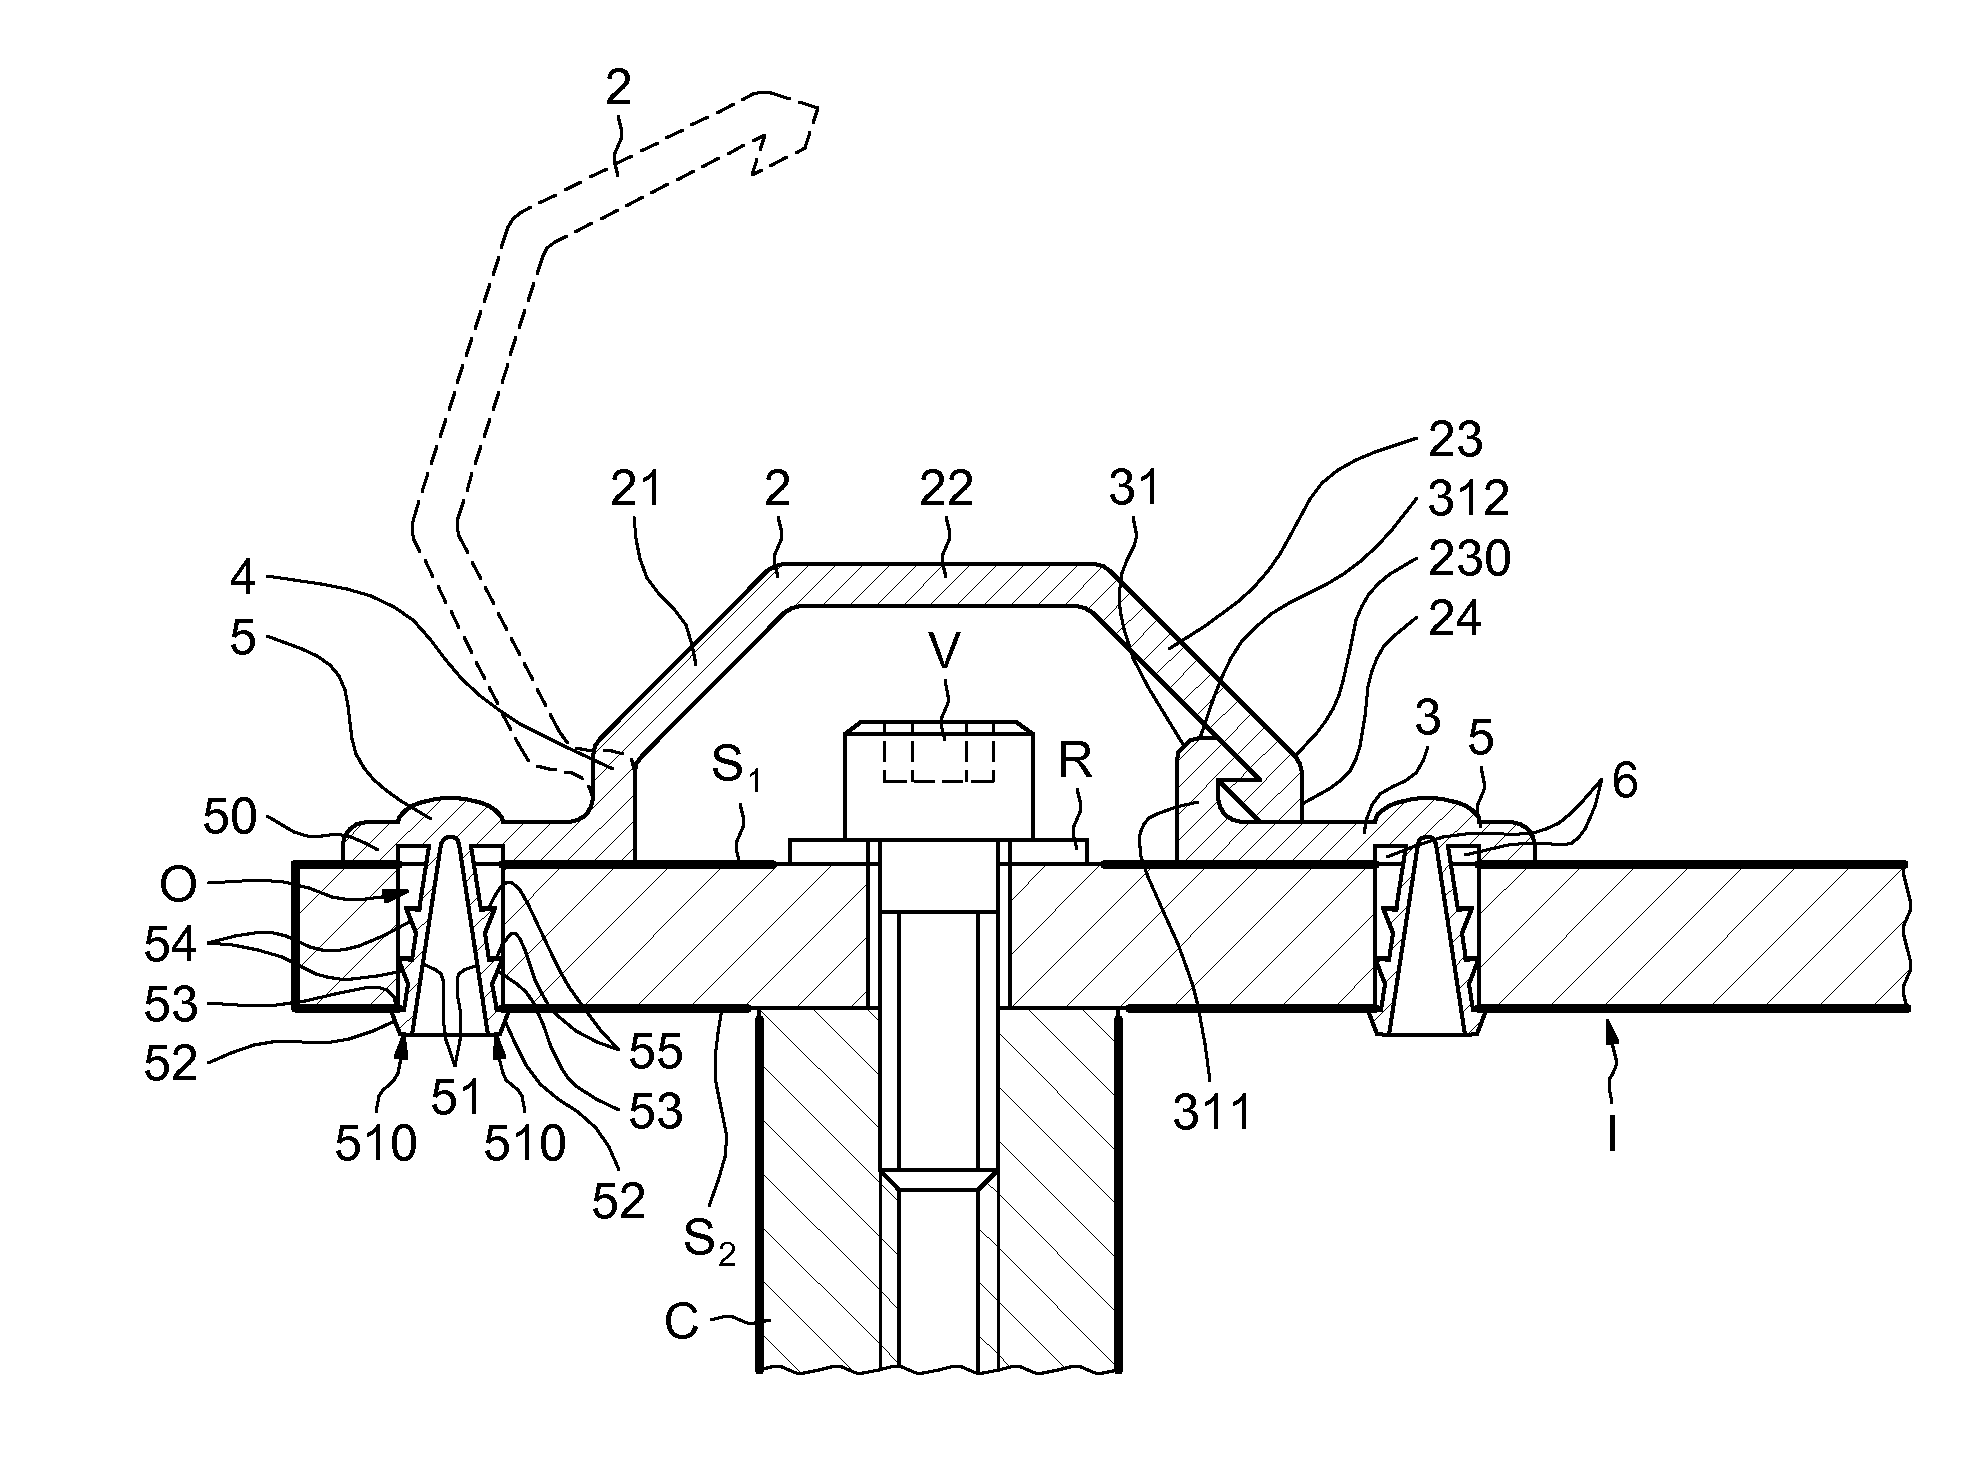 Device for protection of a live element mounted on a support in an electrical box